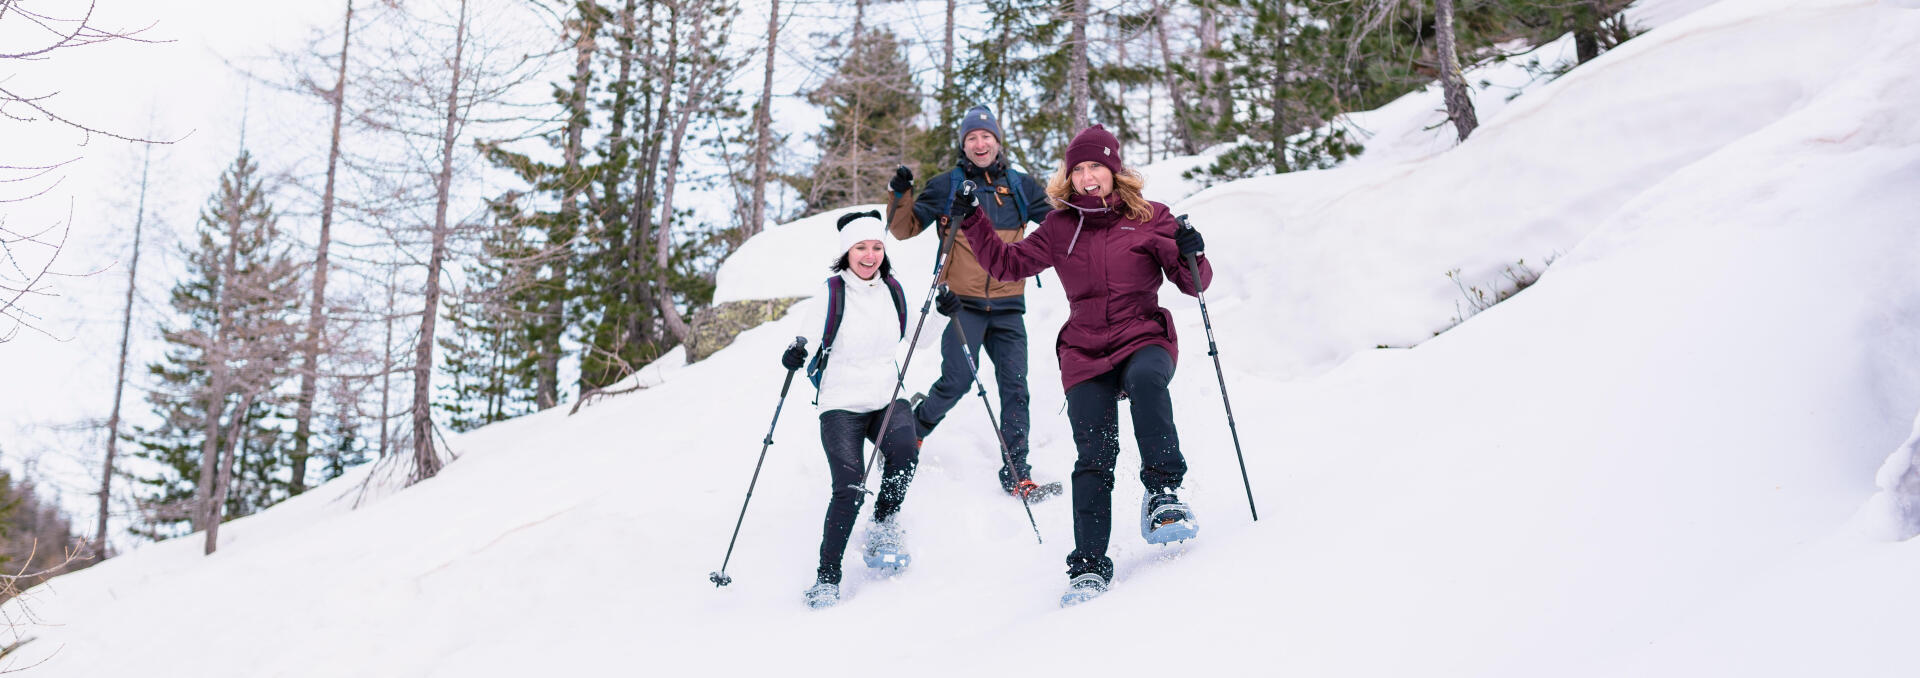 6 TIPS ON HOW TO USE YOUR SNOWSHOES PROPERLY